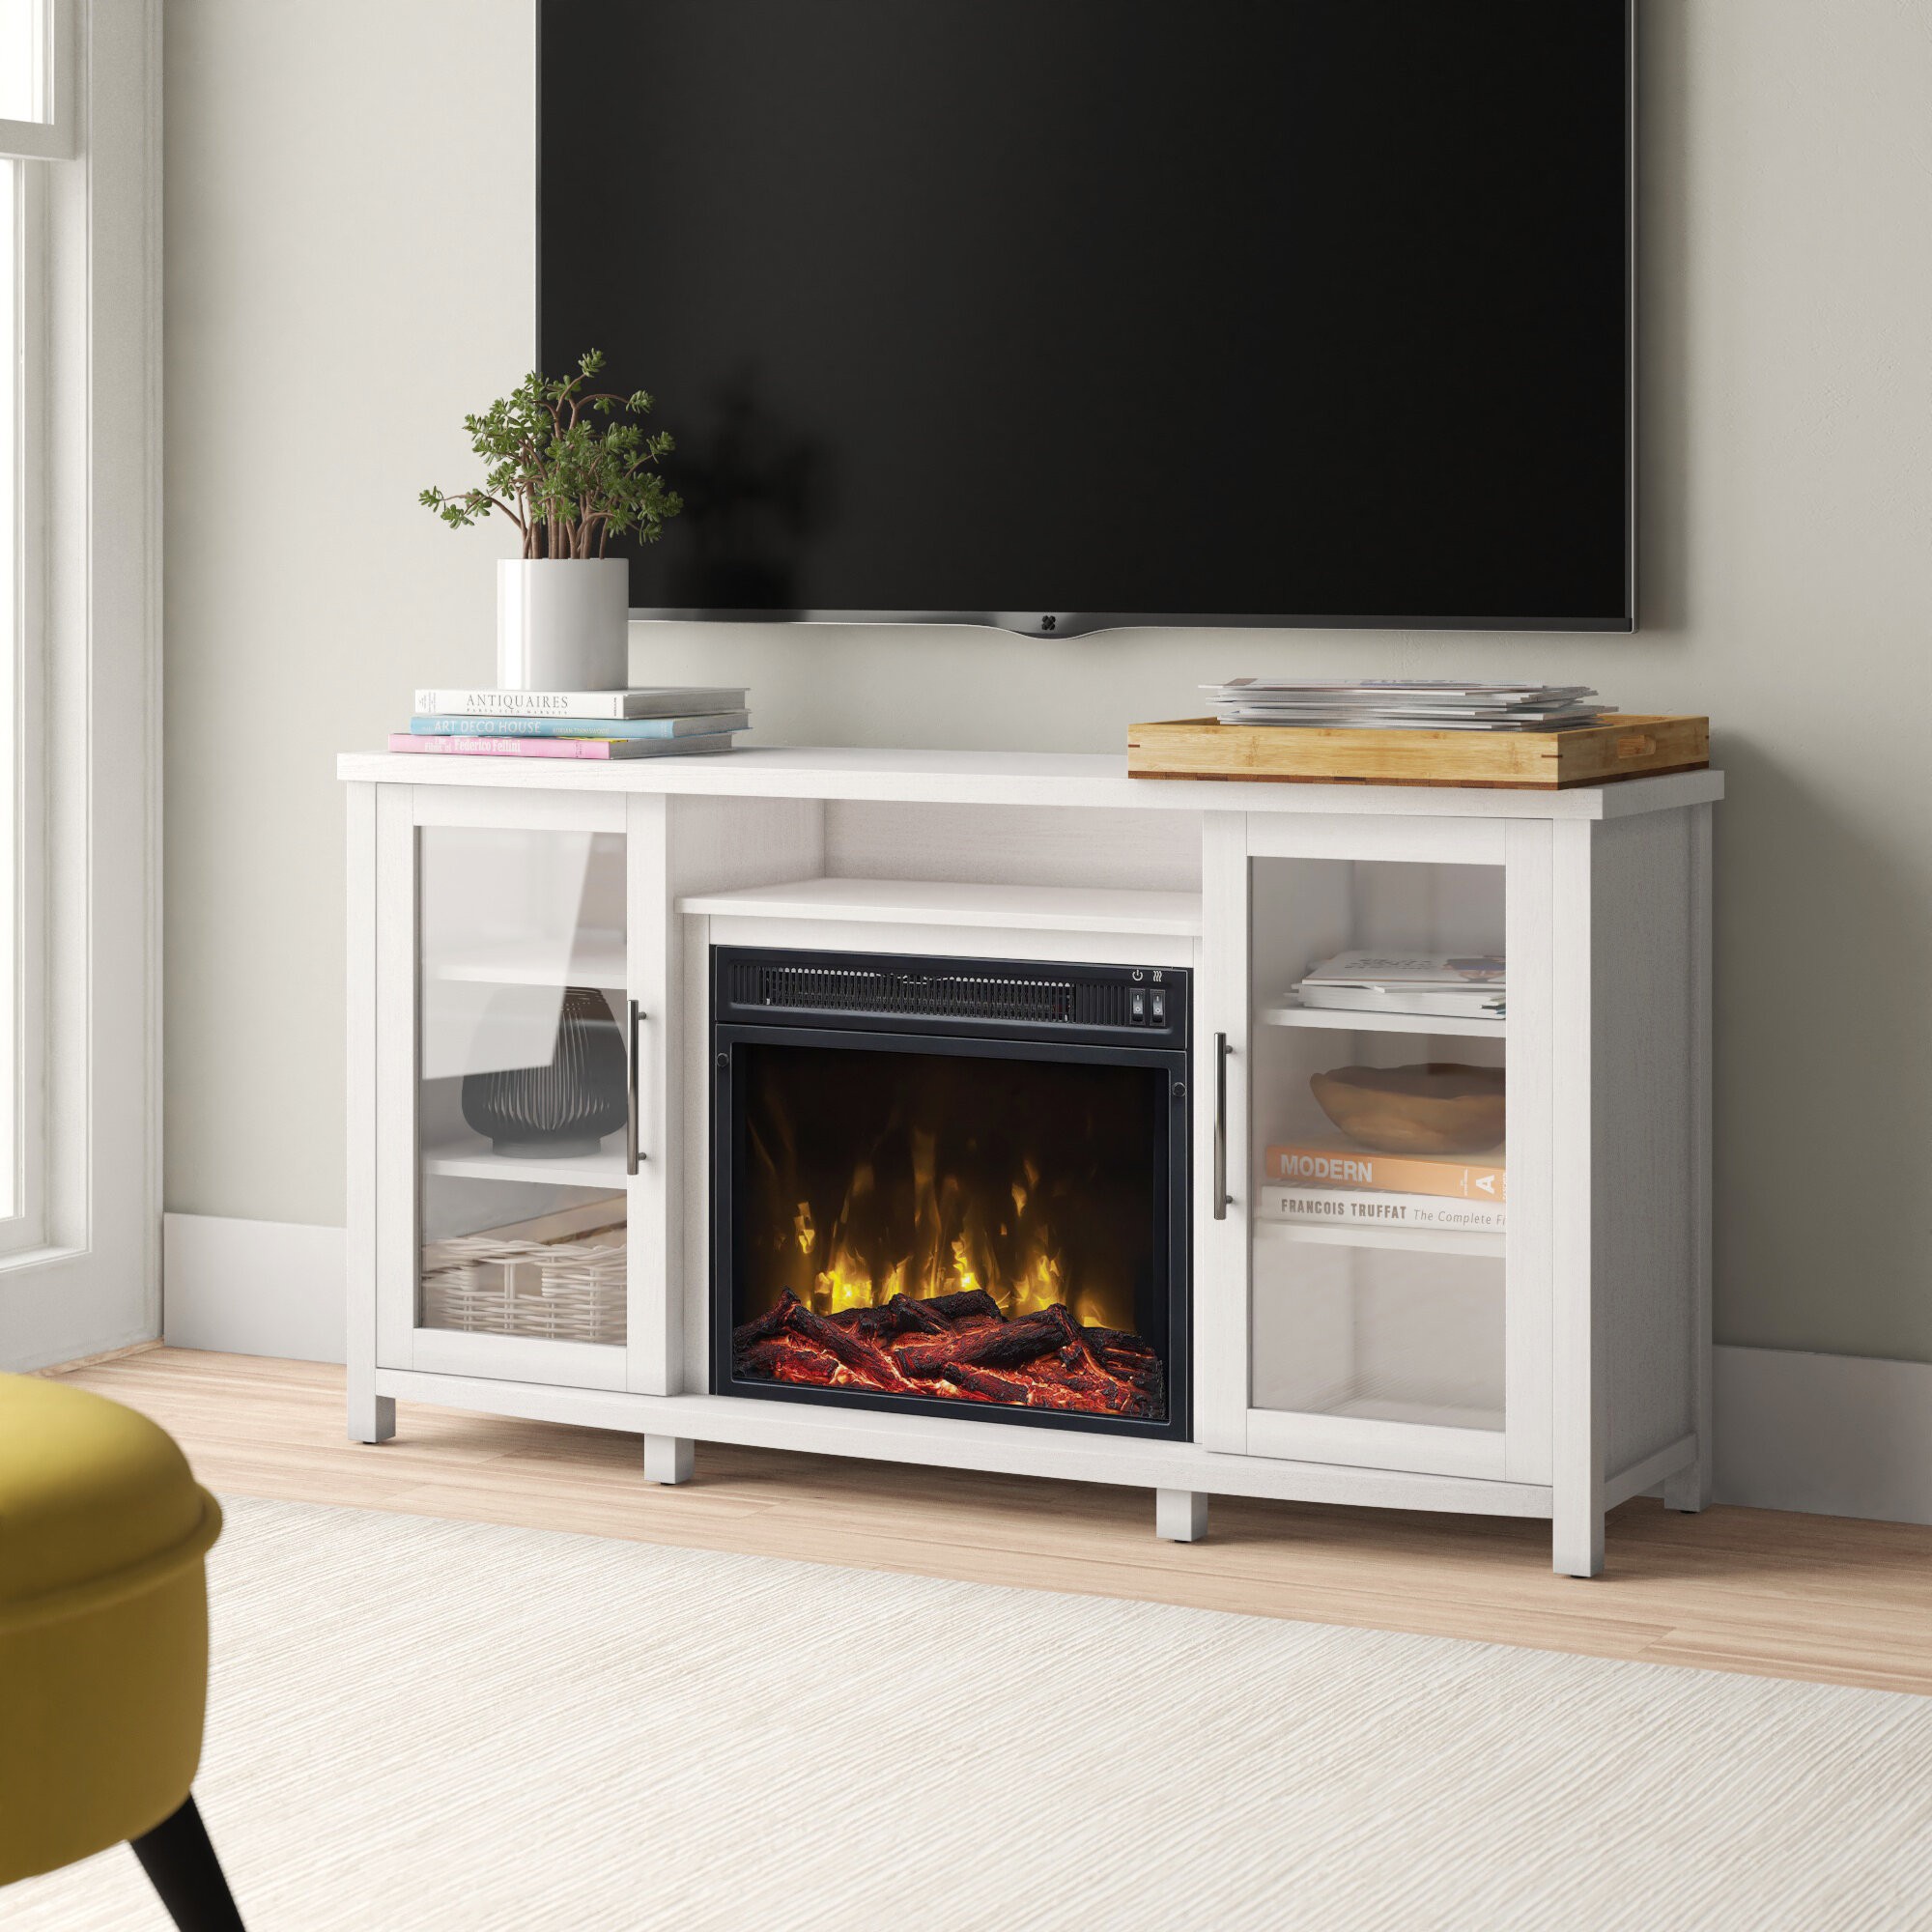 Lockesburg TV Stand for TVs up to 60" with Fireplace Included